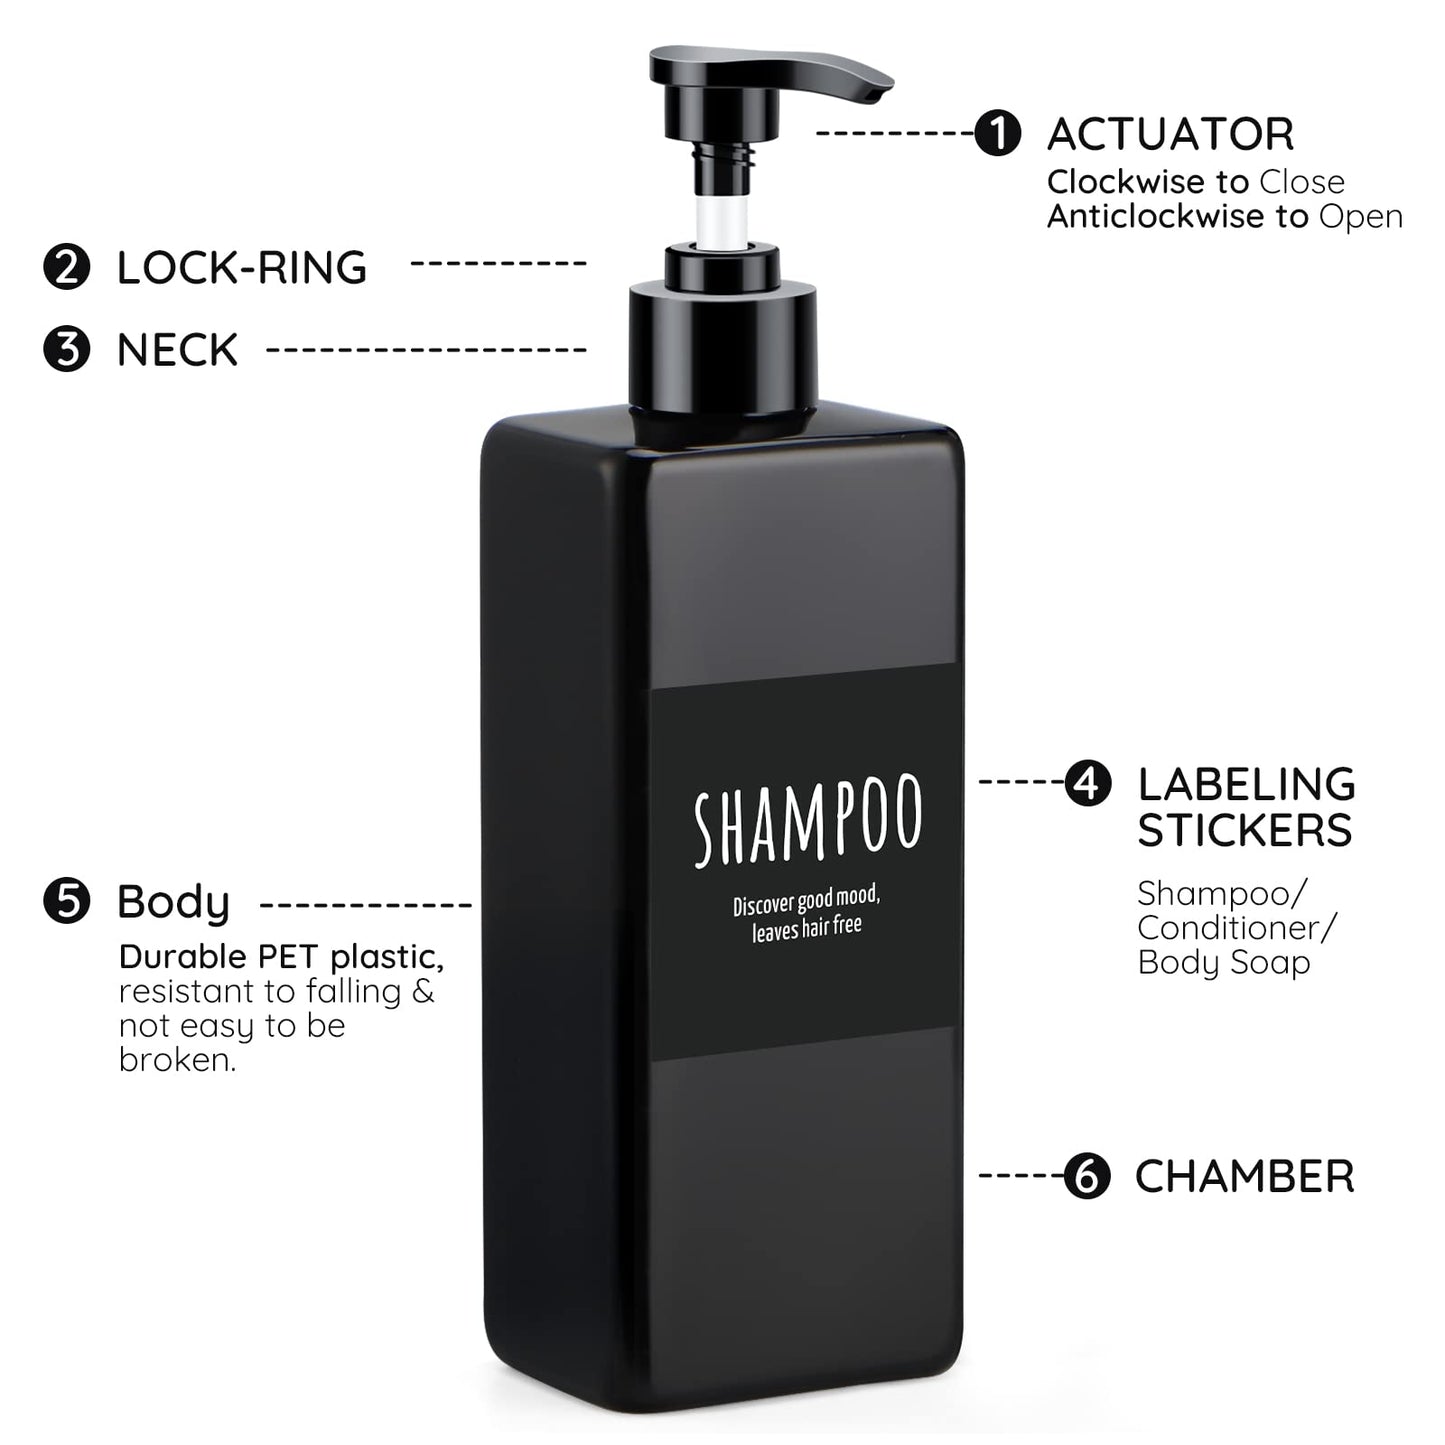 Segbeauty Shampoo and Conditioner Dispenser Refillable, 3pcs 16.9oz Shower Bottles Soap Dispenser with Labels, 500ml Empty Plastic Square Pump Bottle Dispenser Body Wash Containers for Bathroom Black